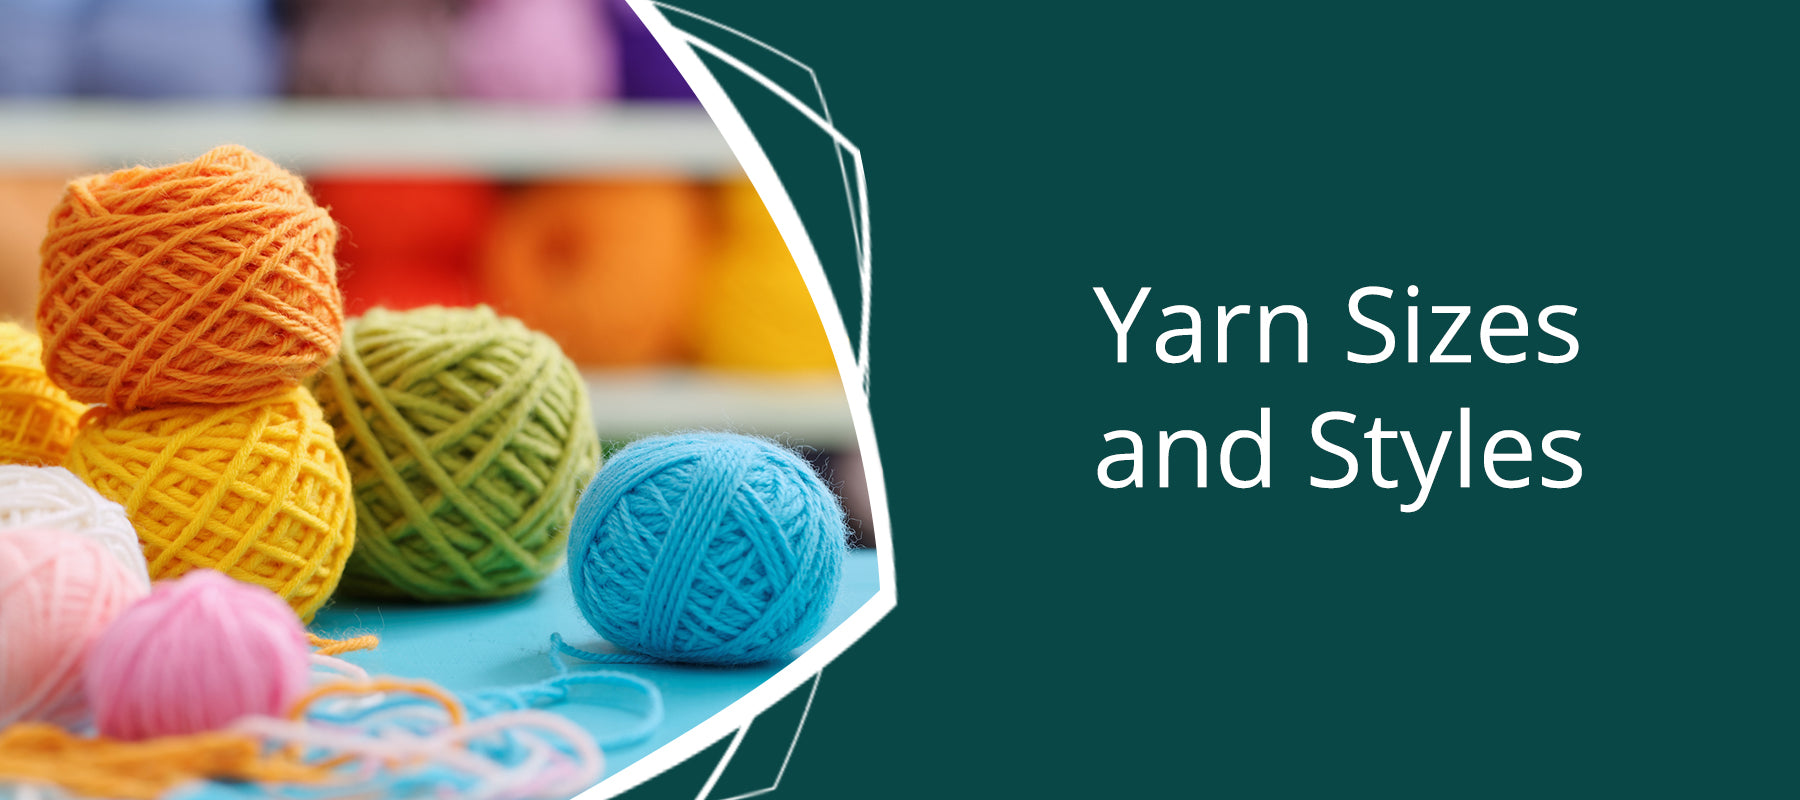 Yarn Sizes and Styles - Thread Collective Australia